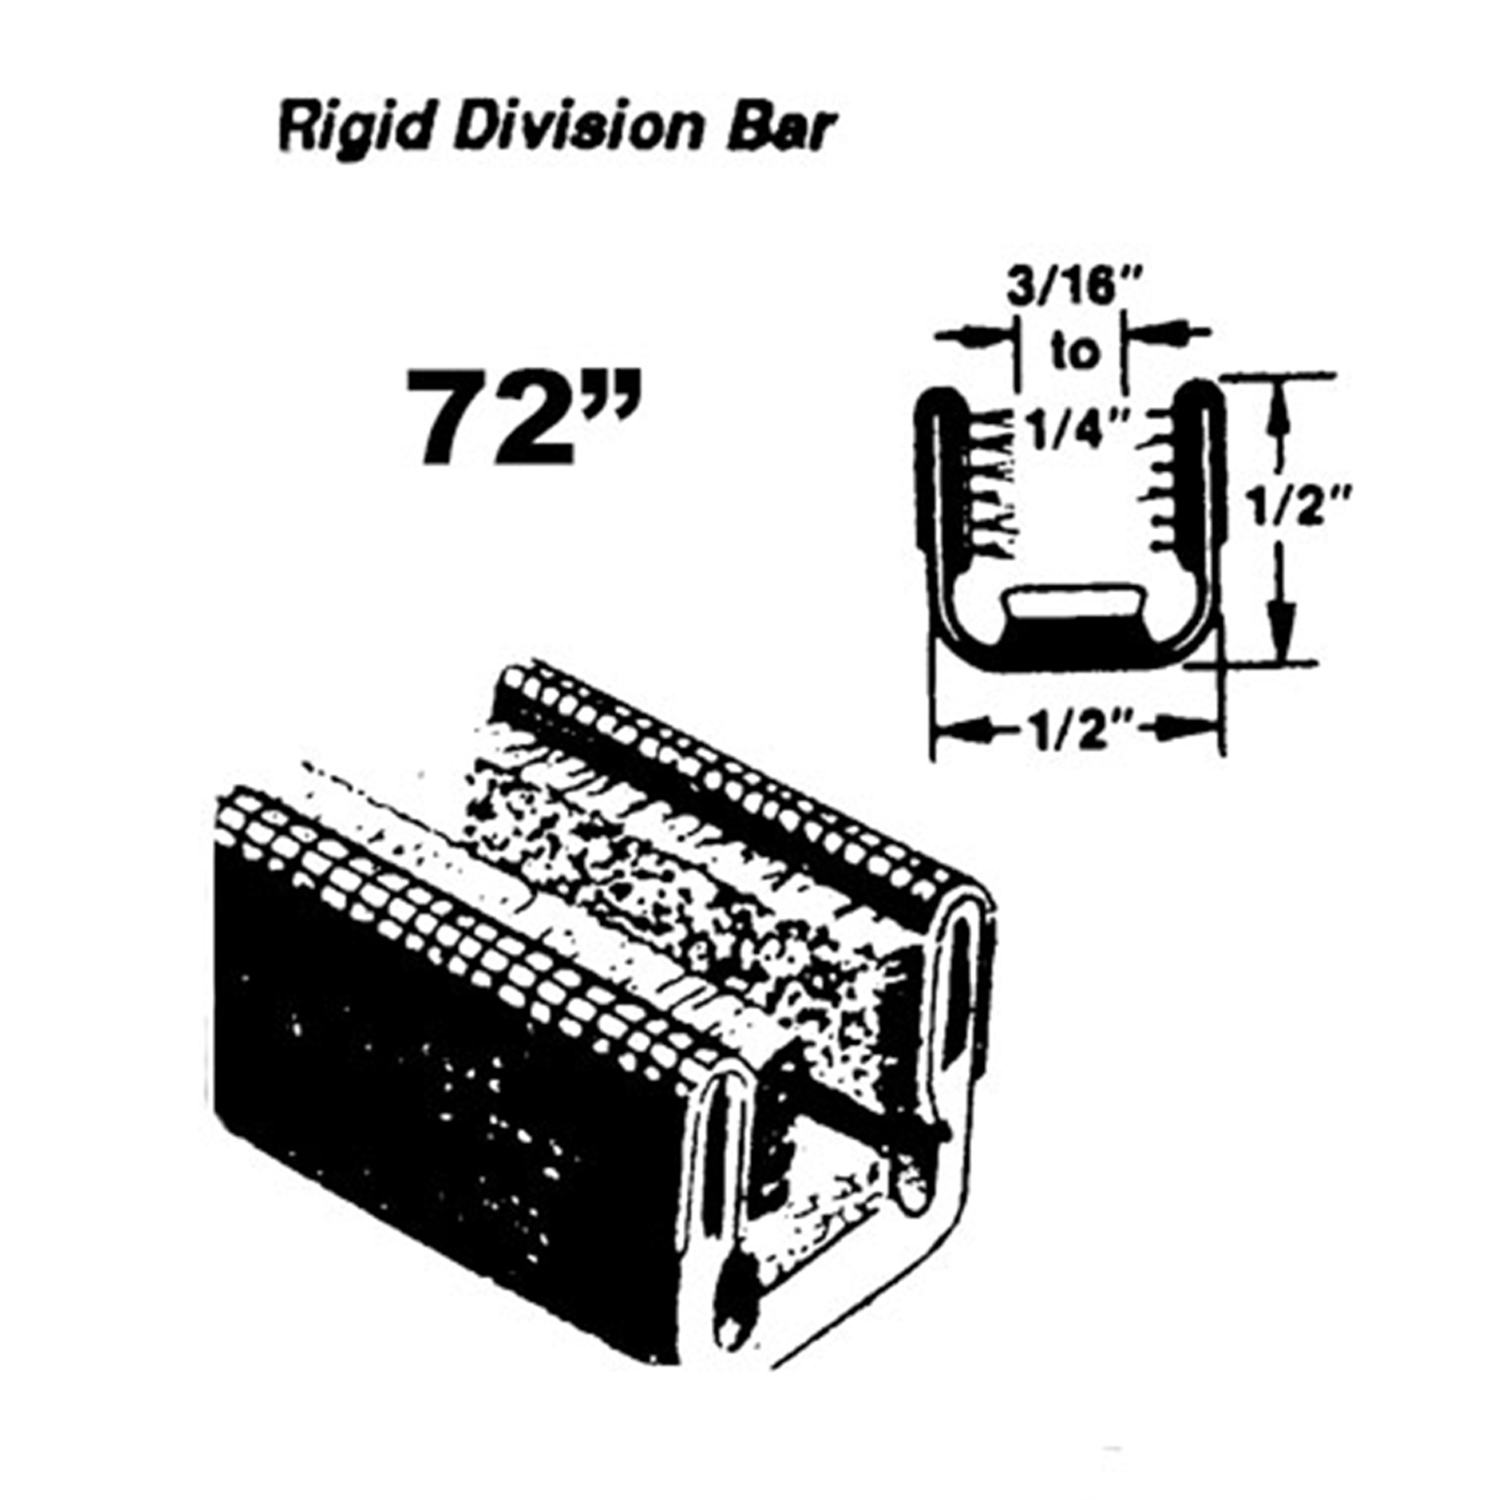 1957 GMC 252 Upper and lower rigid division-bar channel-WC 25-72